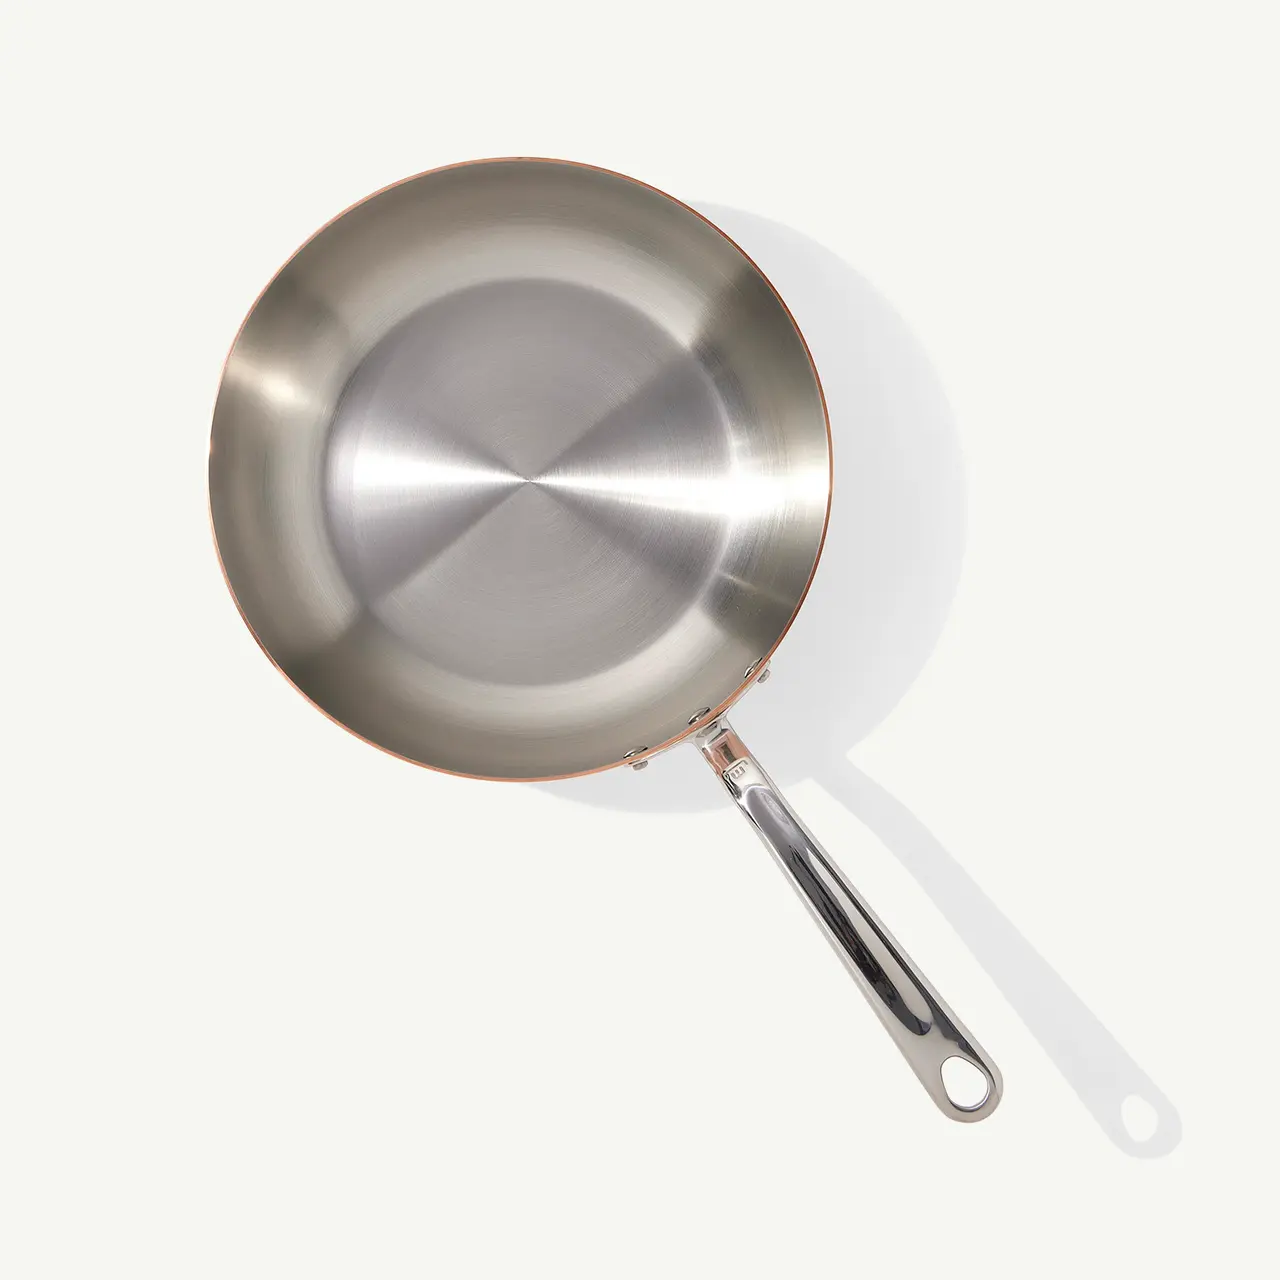 A stainless steel frying pan with a long handle is shown against a plain background, viewed from above.